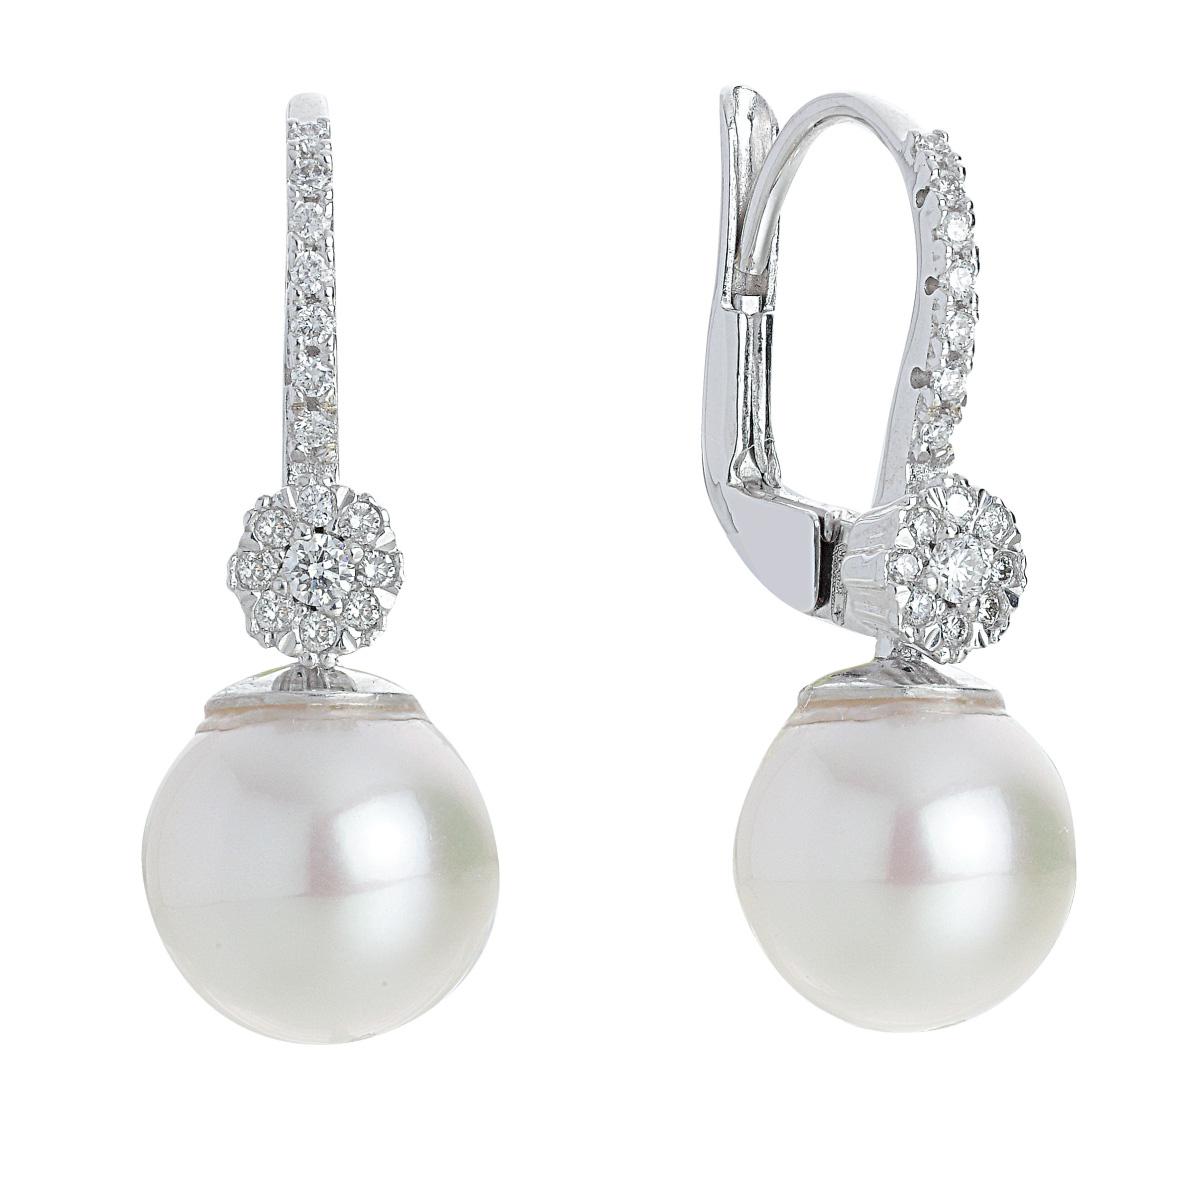 Hook earrings in 18 kt white gold with diamonds and sea pearls 8.50-9mm - OD385-LB